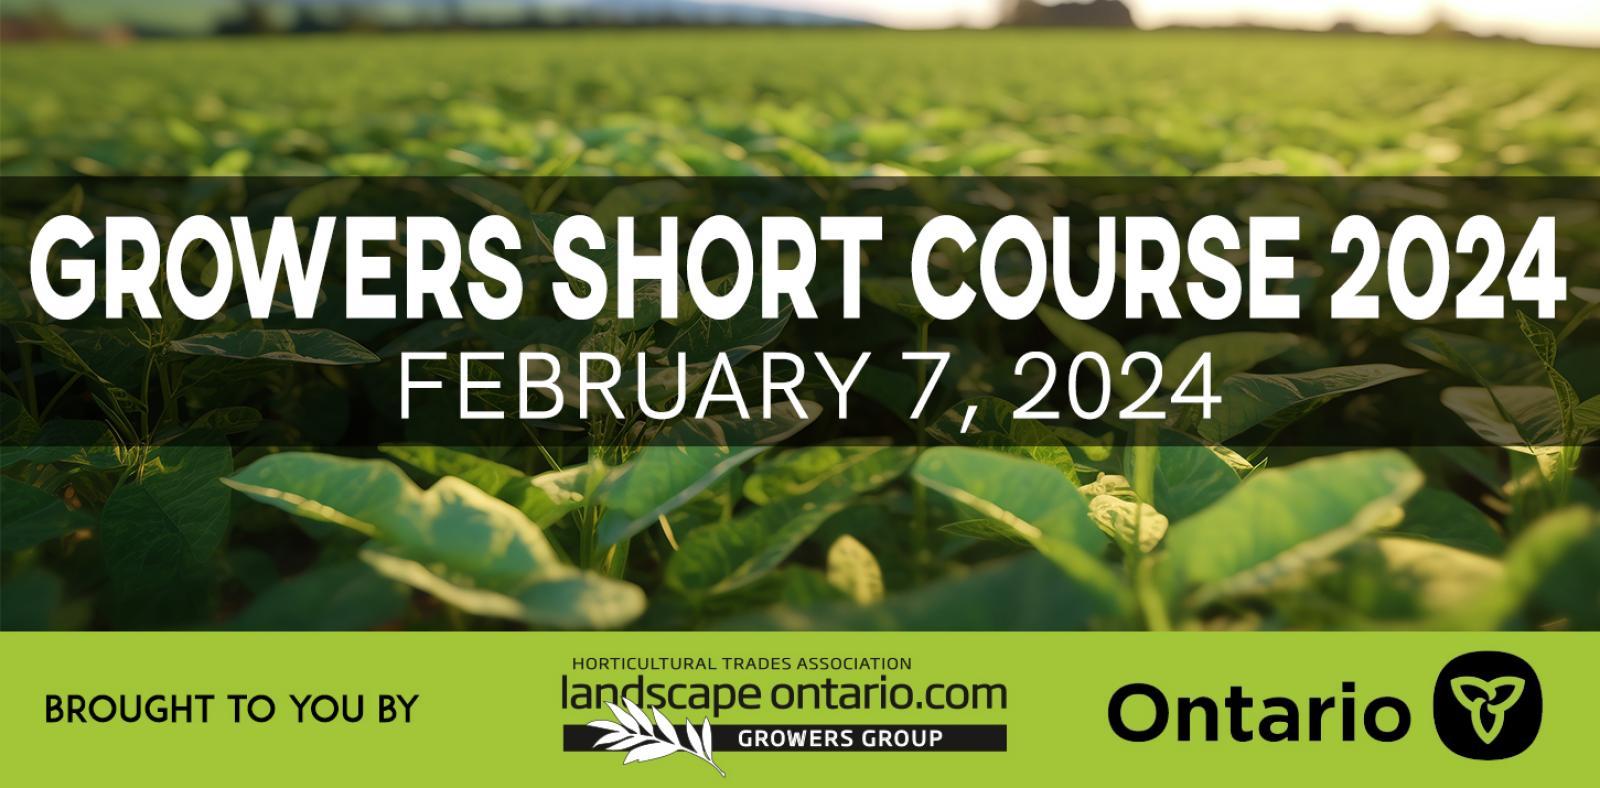 Growers Short Course 2024